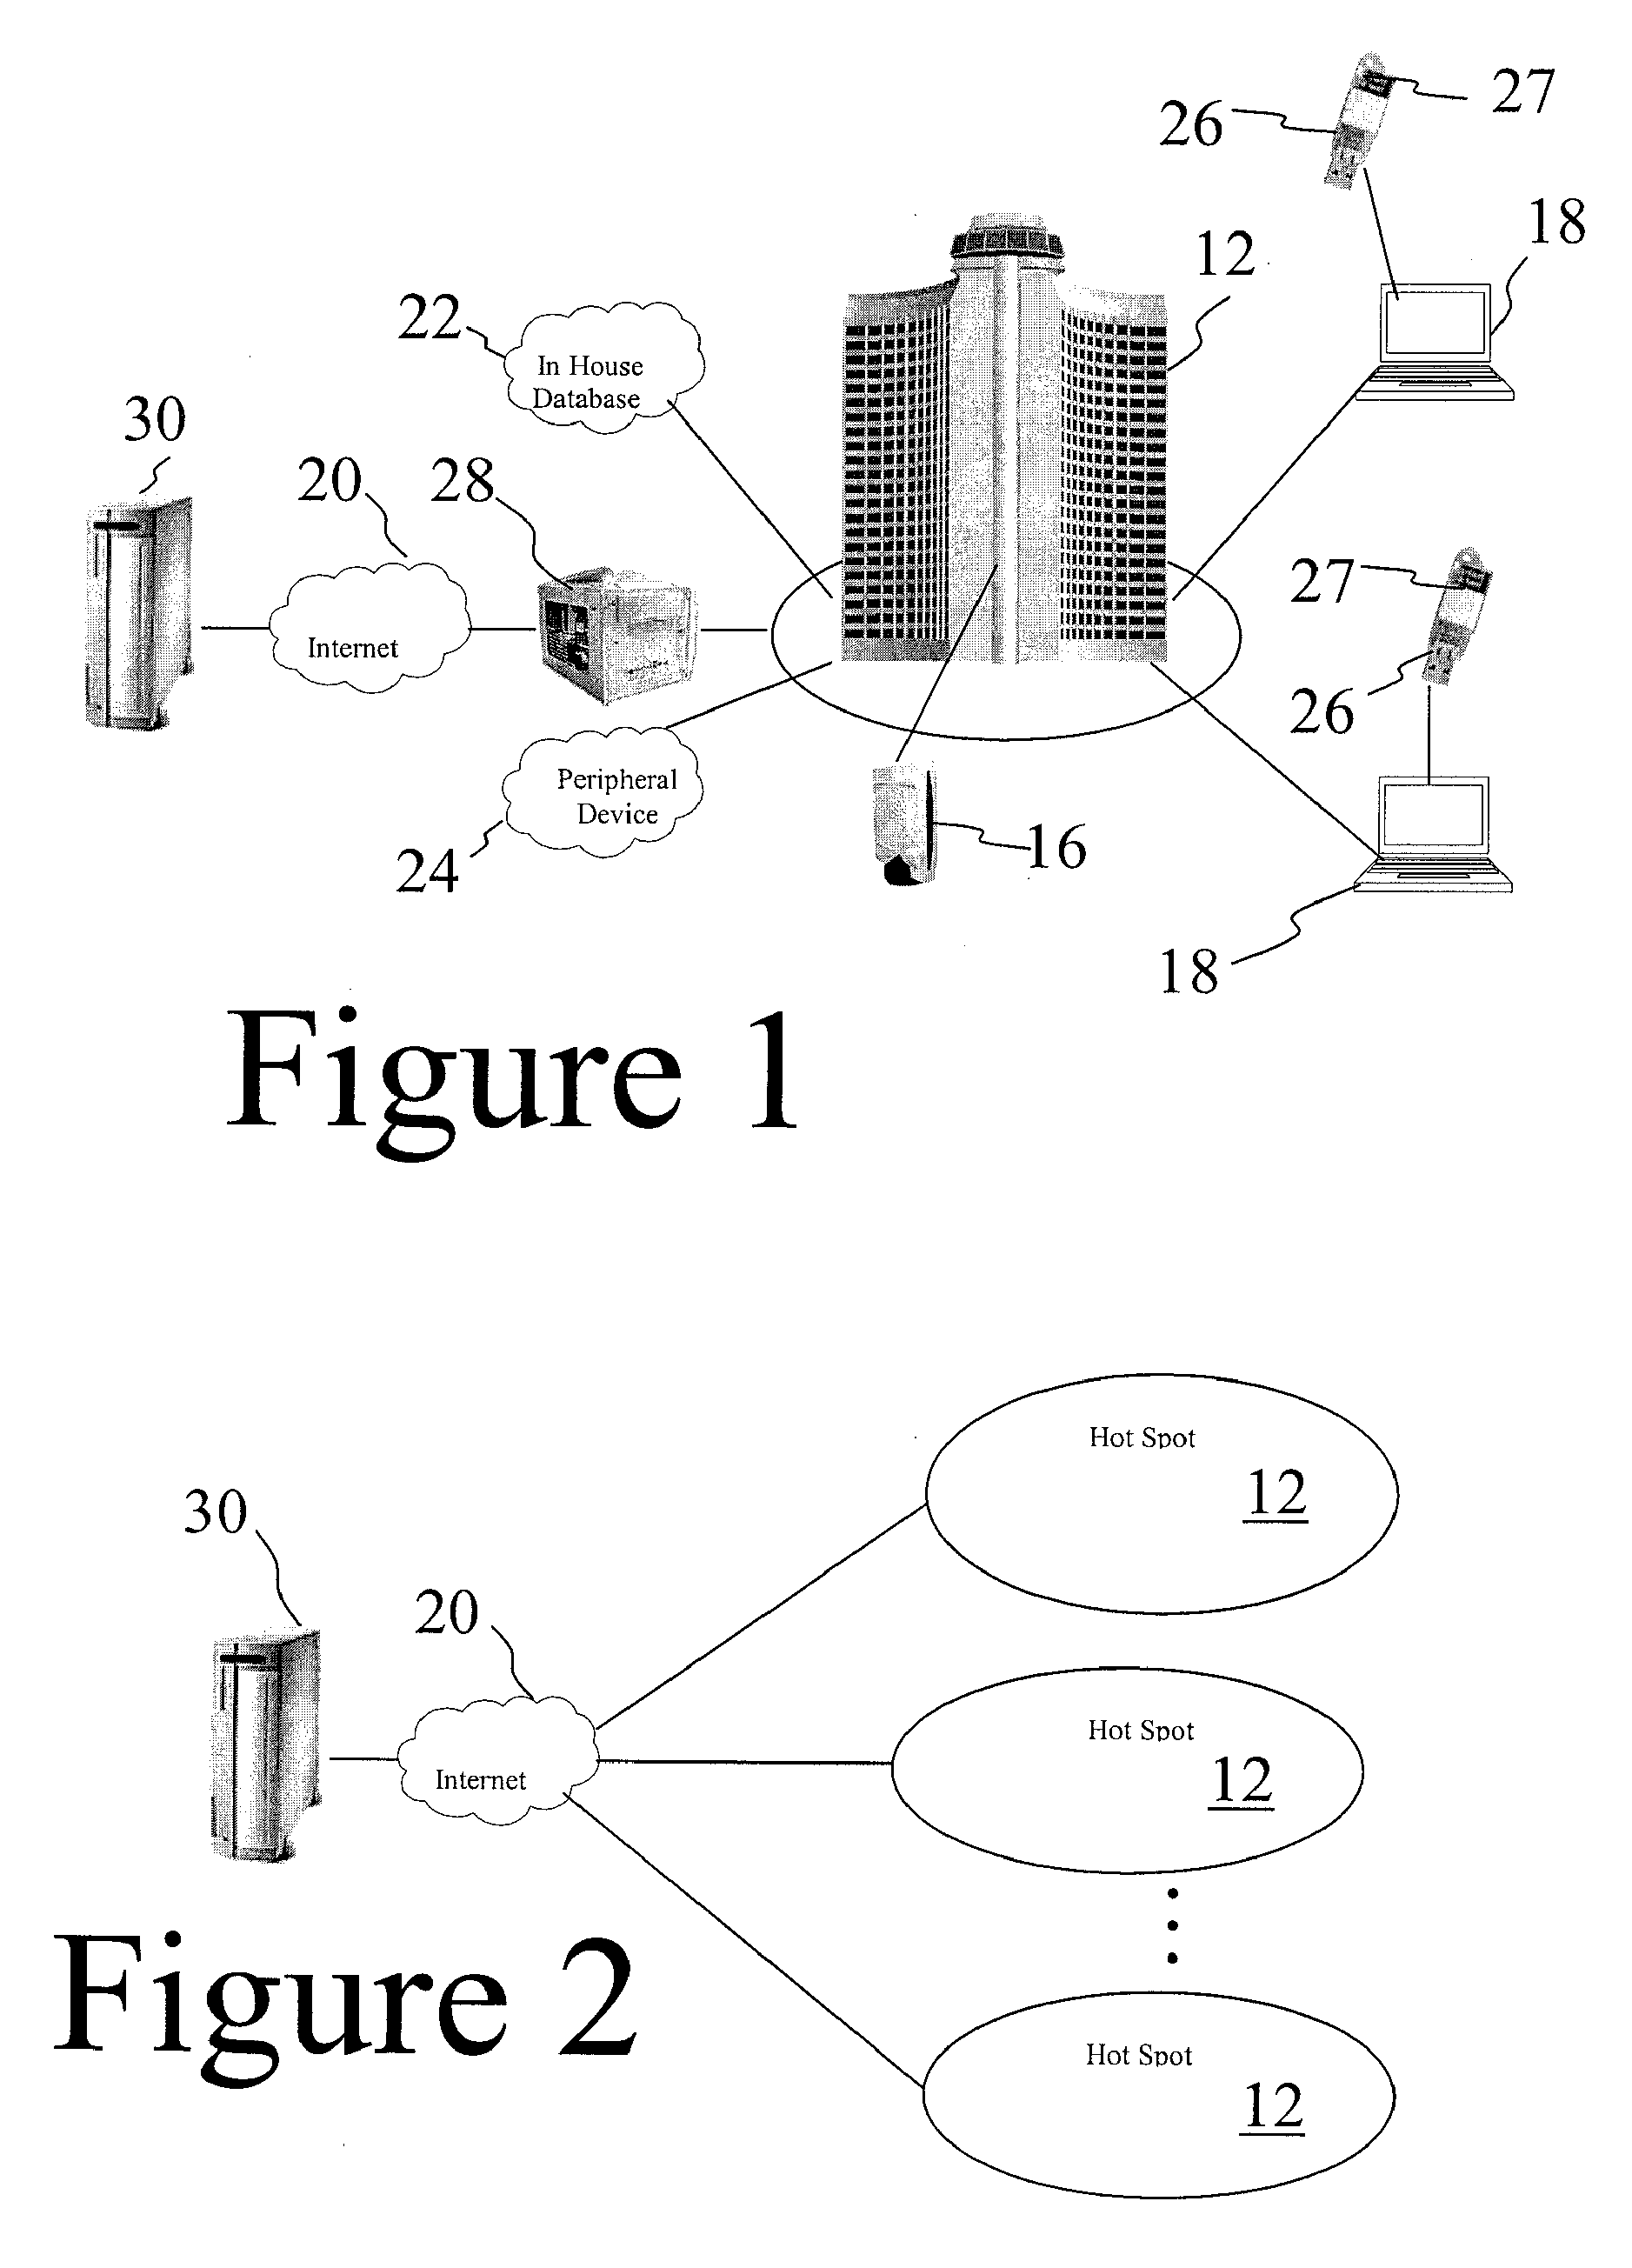 Token based two factor authentication and virtual private networking system for network management and security and online third party multiple network management method